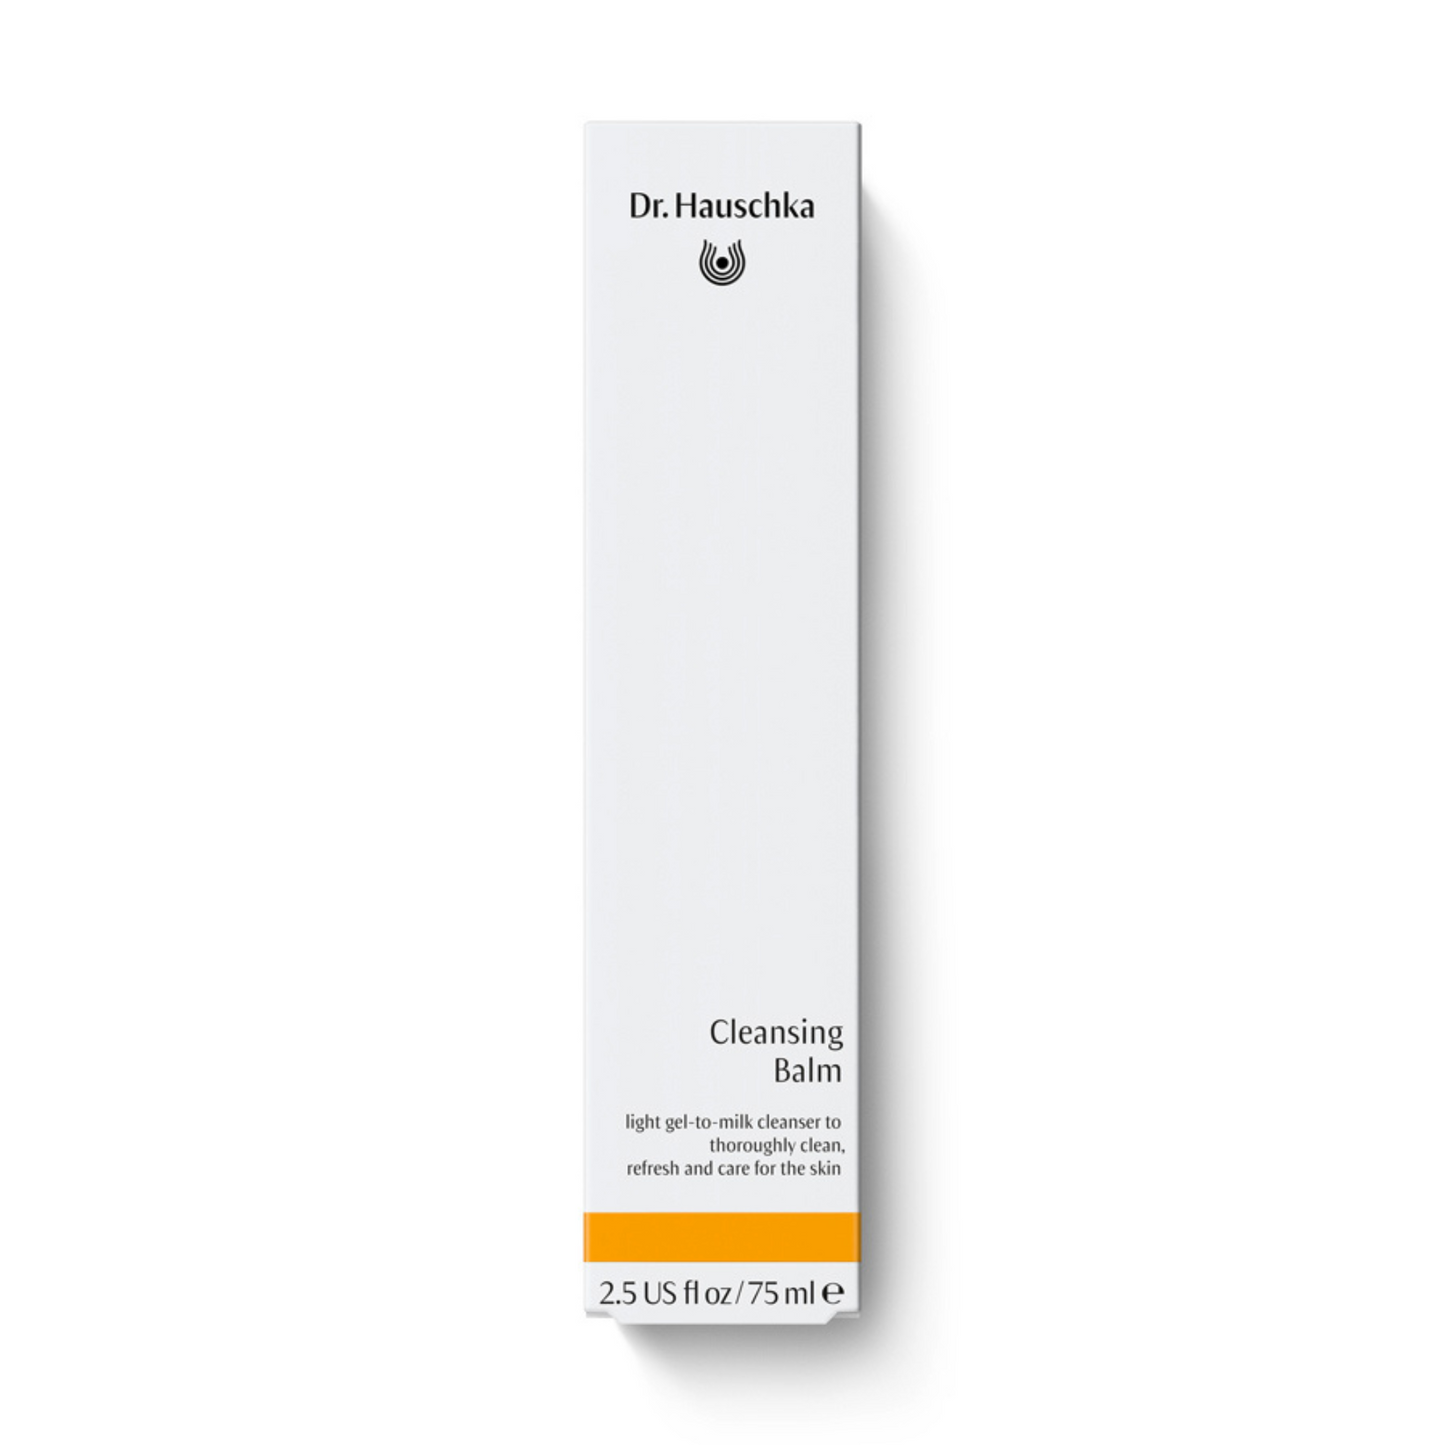 Primary Image of Dr. Hauschka Skin Care Cleansing Balm (2.5 fl oz)